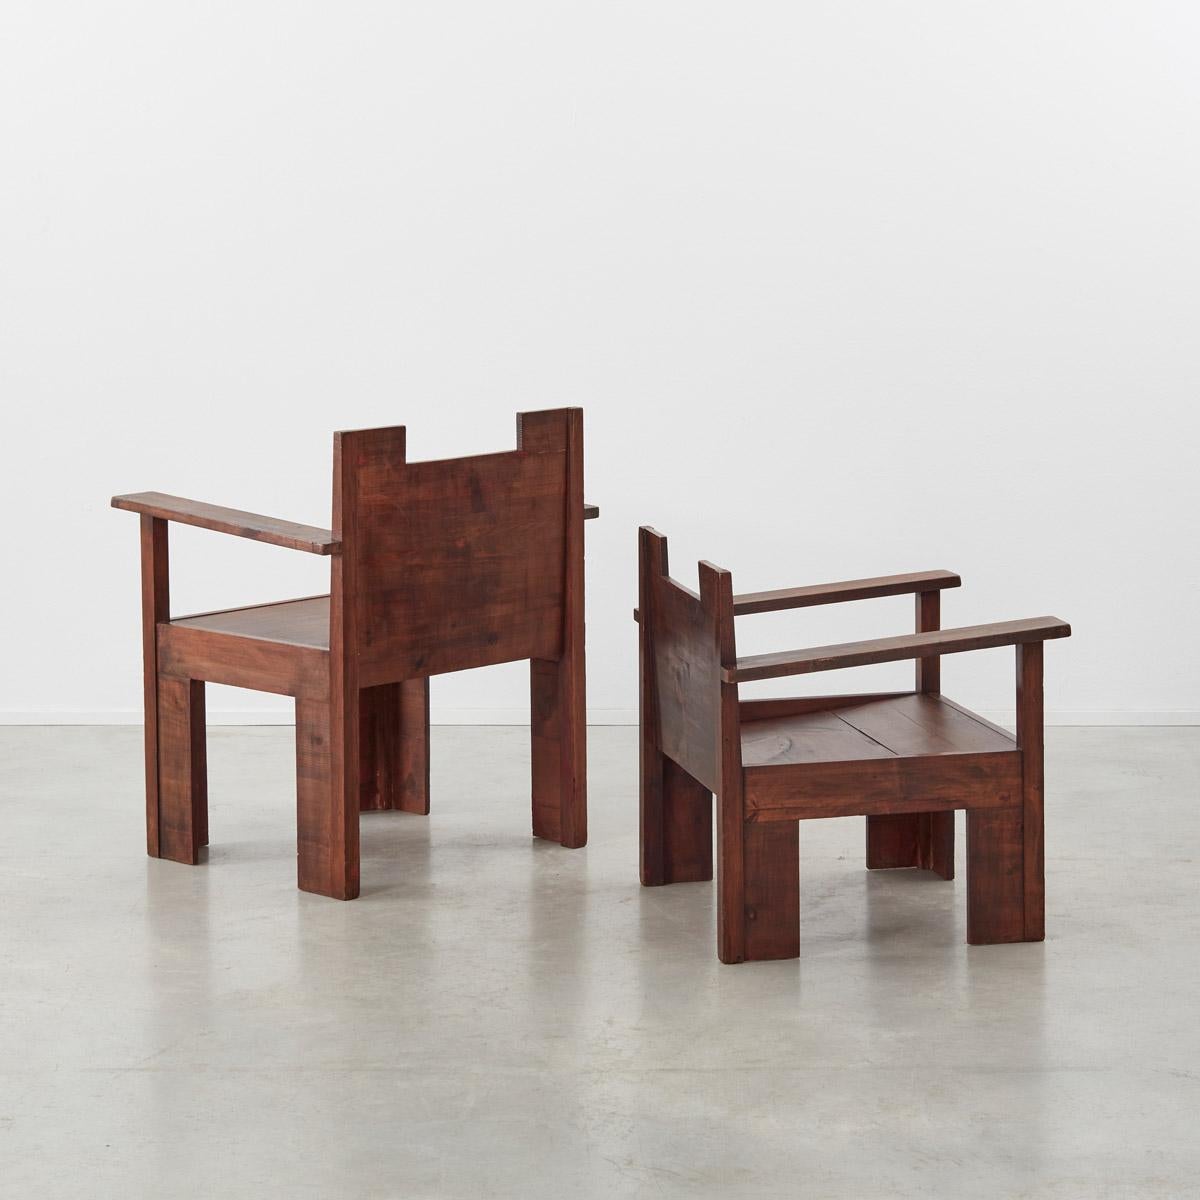 Stained His and Hers Brutalist Wooden Chairs, circa 1970s